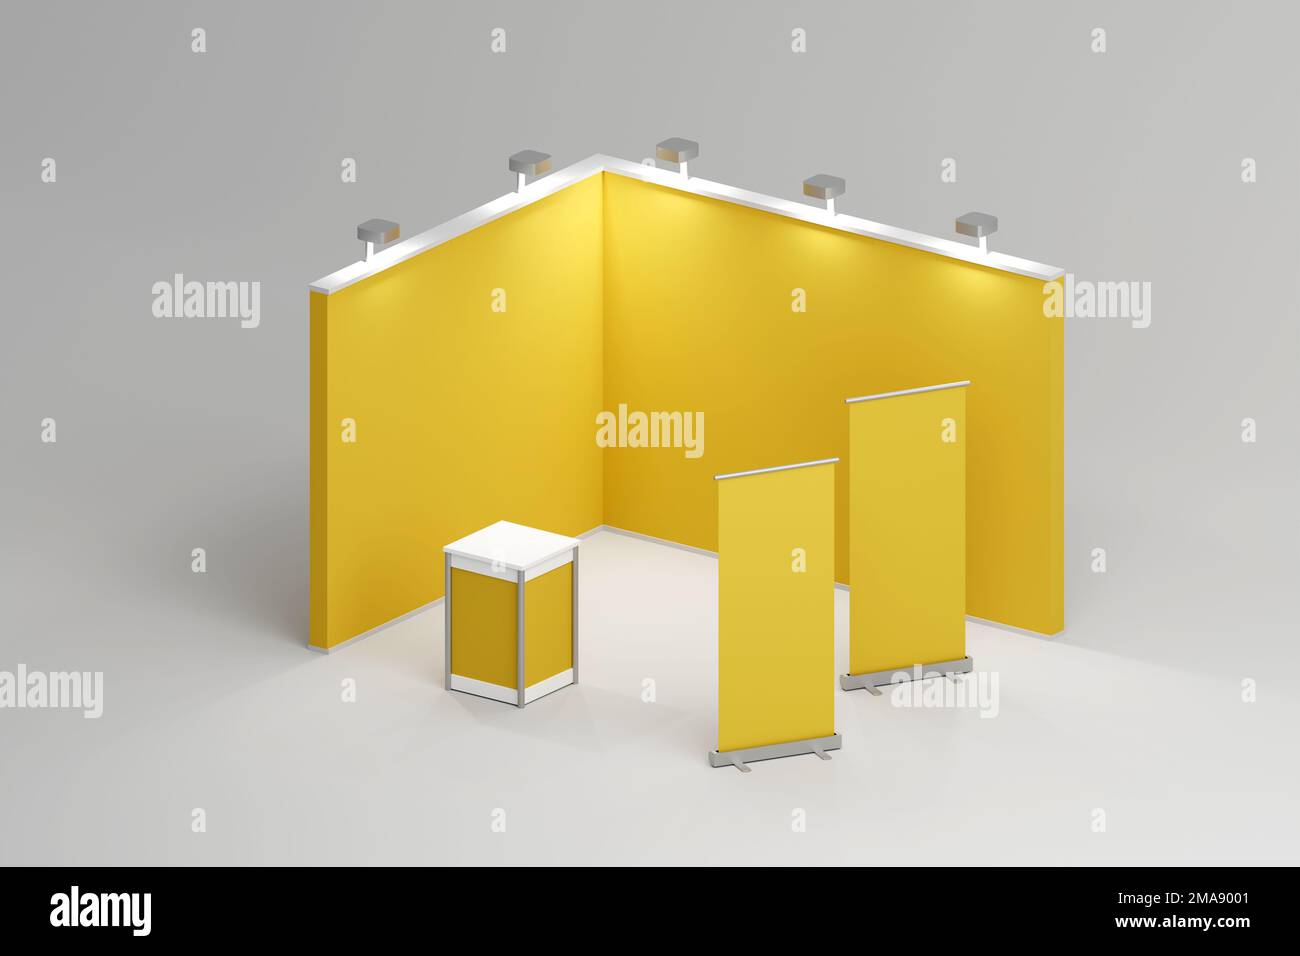 Standard exhibition stand with spotlights. Presentation event room display. yellow blank panels, advertising stand. Creative exhibition booth design o Stock Photo